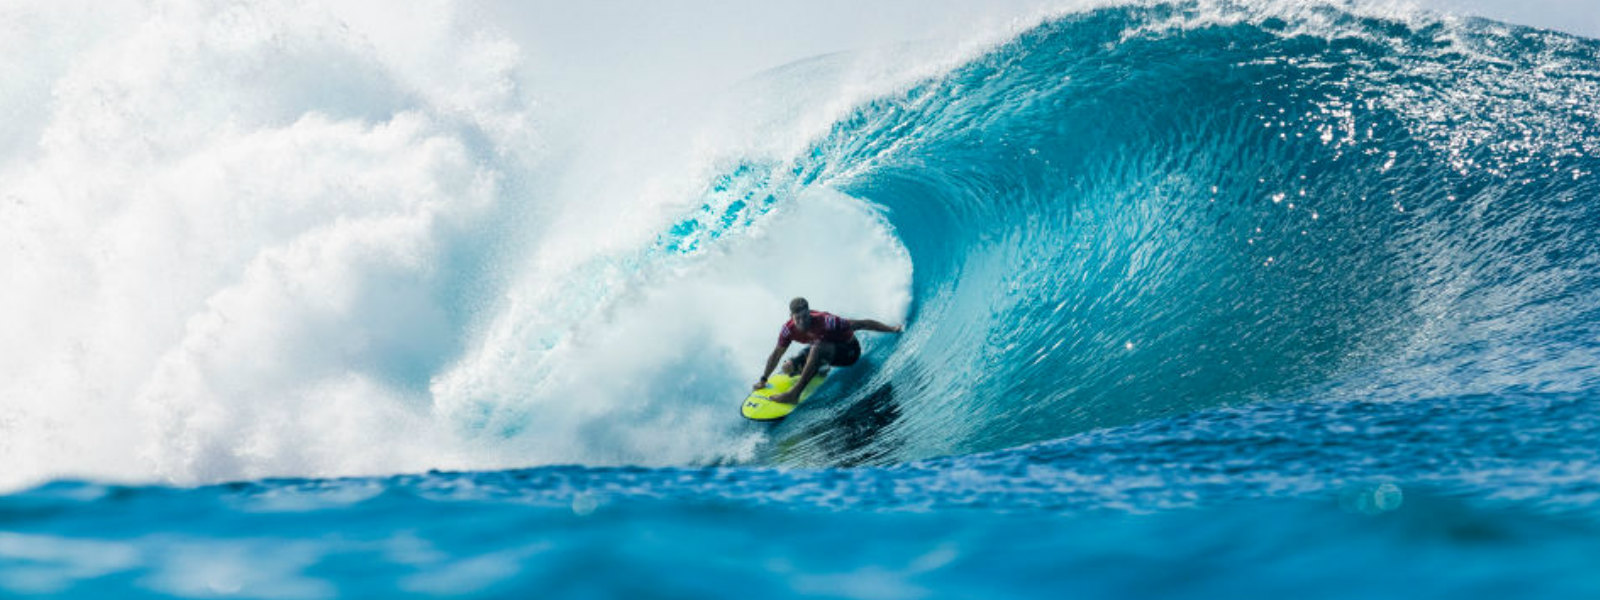 Paris '24 selects Tahiti for Olympic surfing event